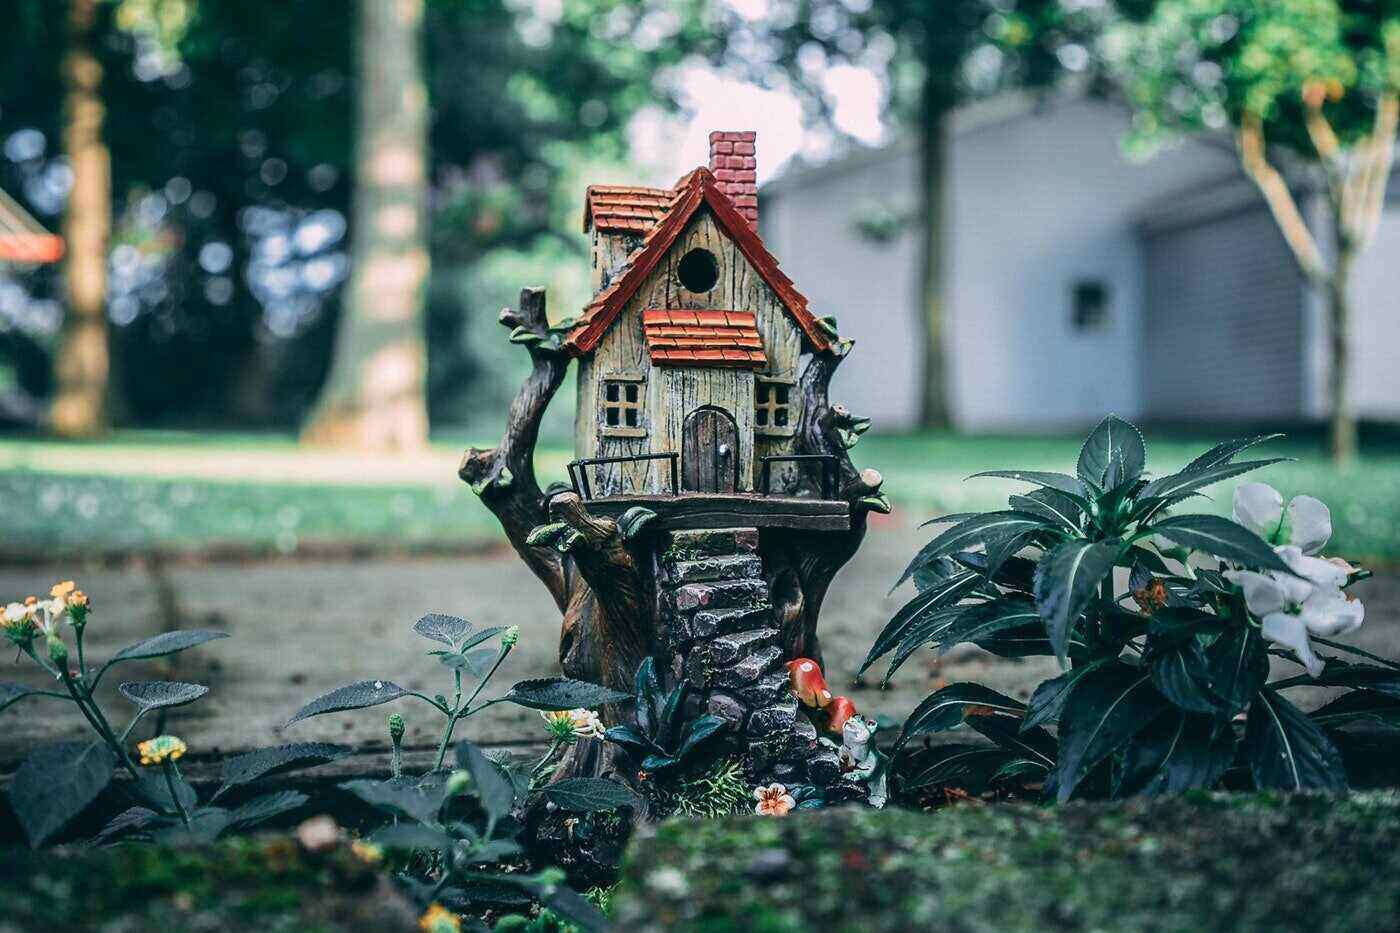 birdhouse in the shape of a house - is it greener to build or buy a house